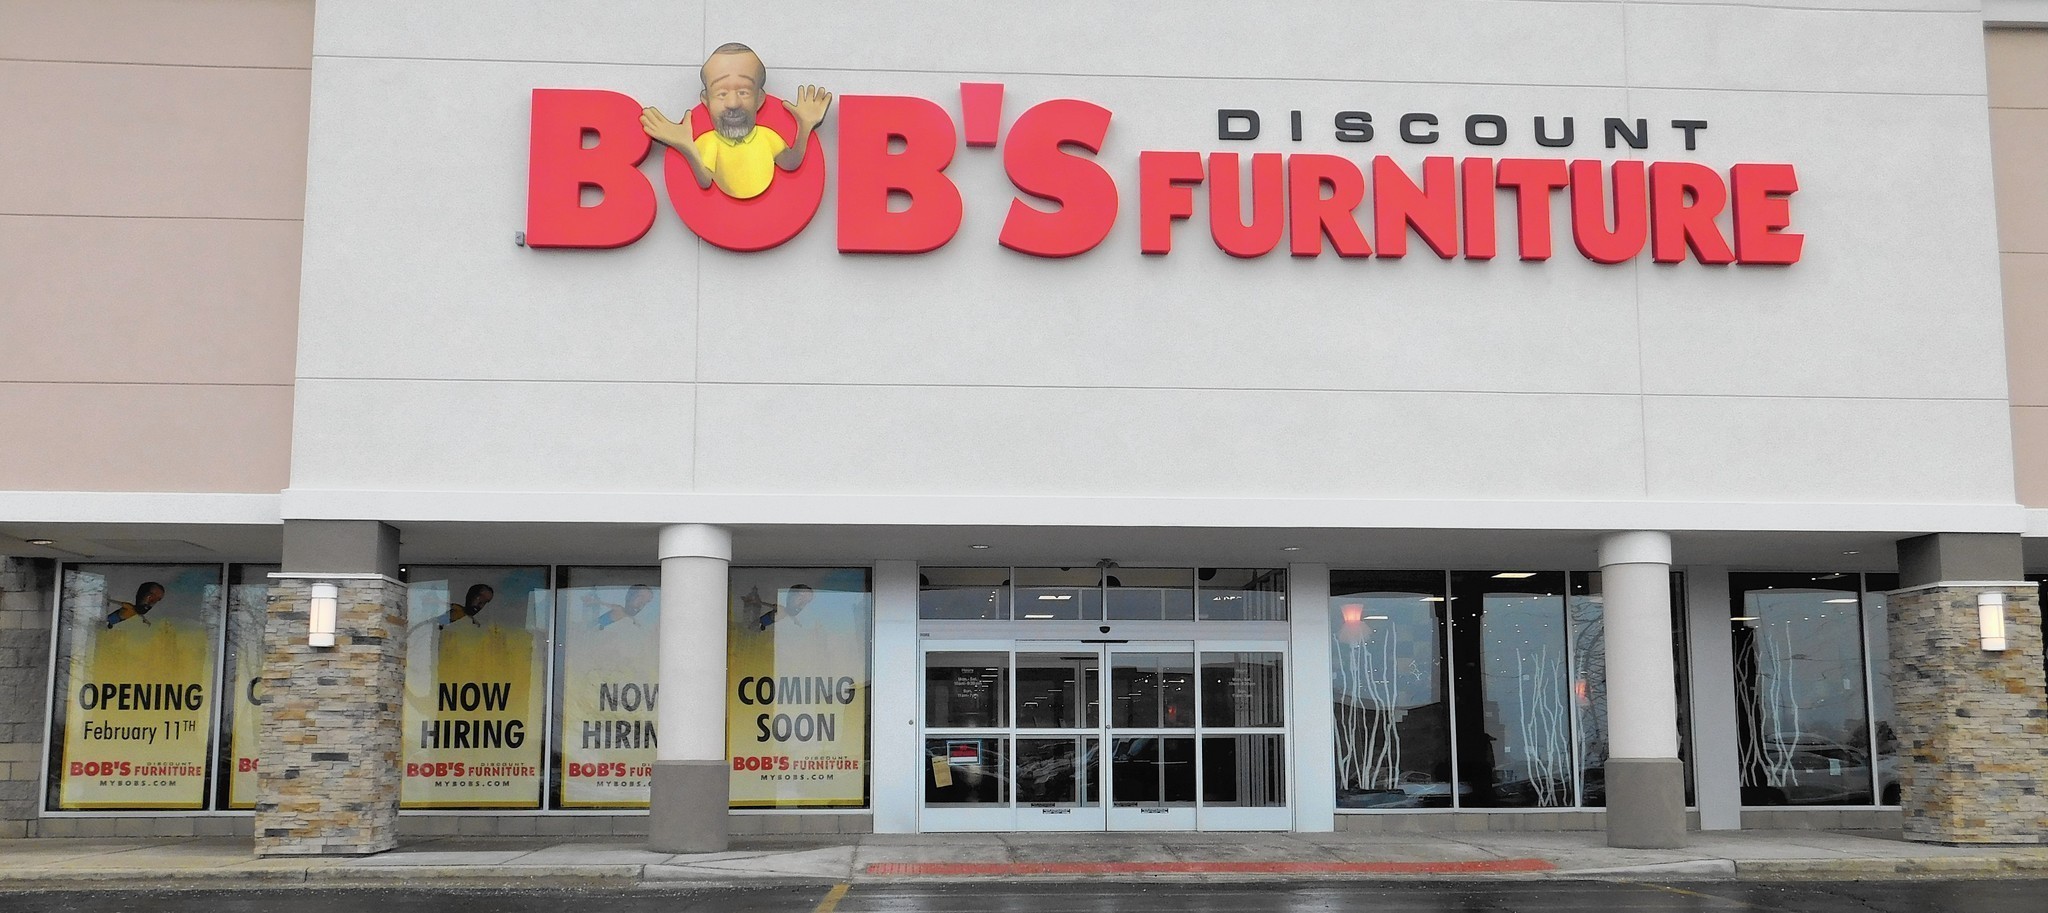 Bob's Discount Furniture set to open 5 stores - Daily ...